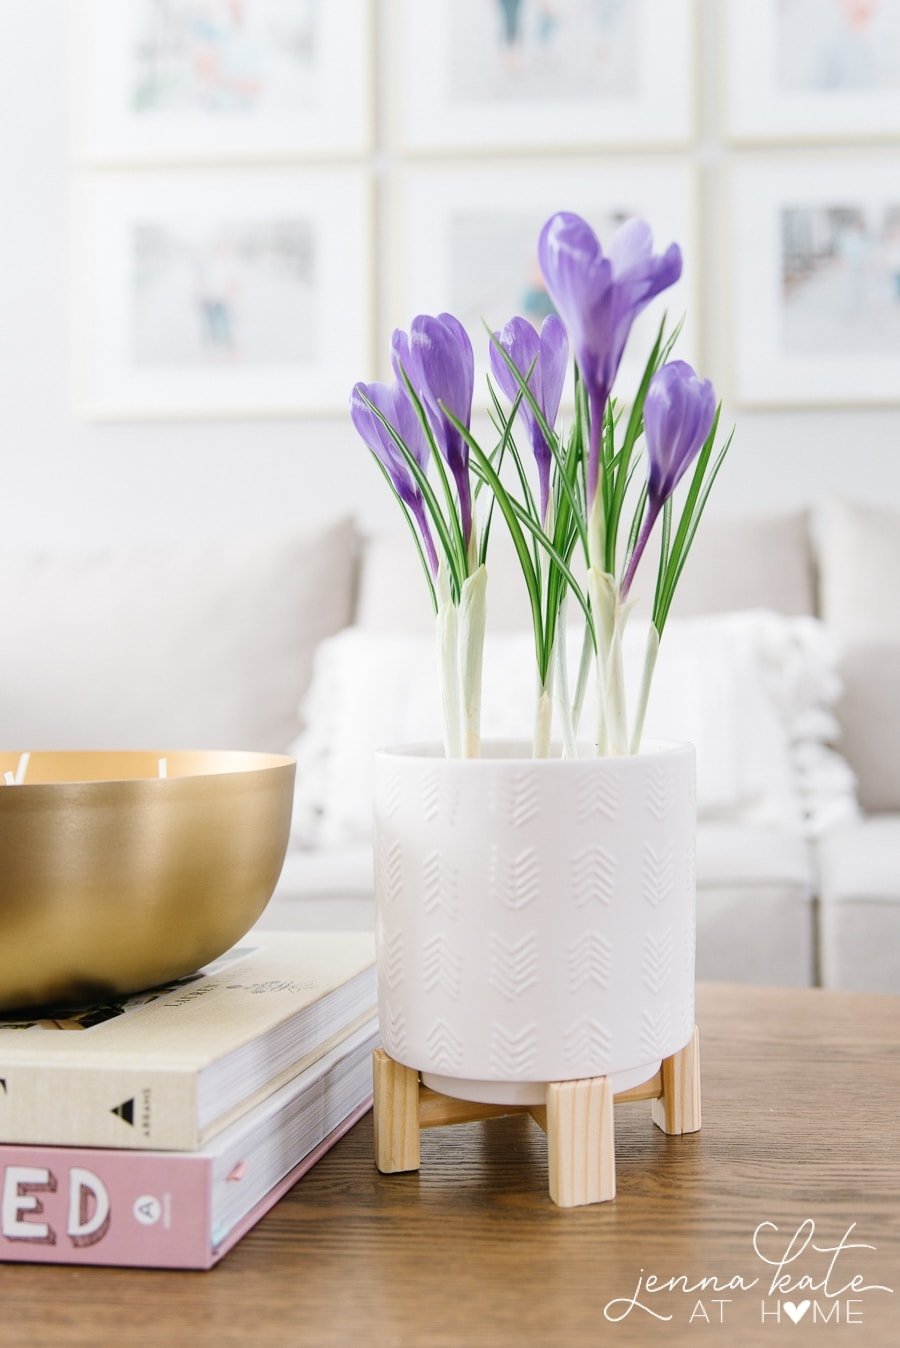 Purple flowers in a white ceramic pot with wooden pedestals near a stack of books